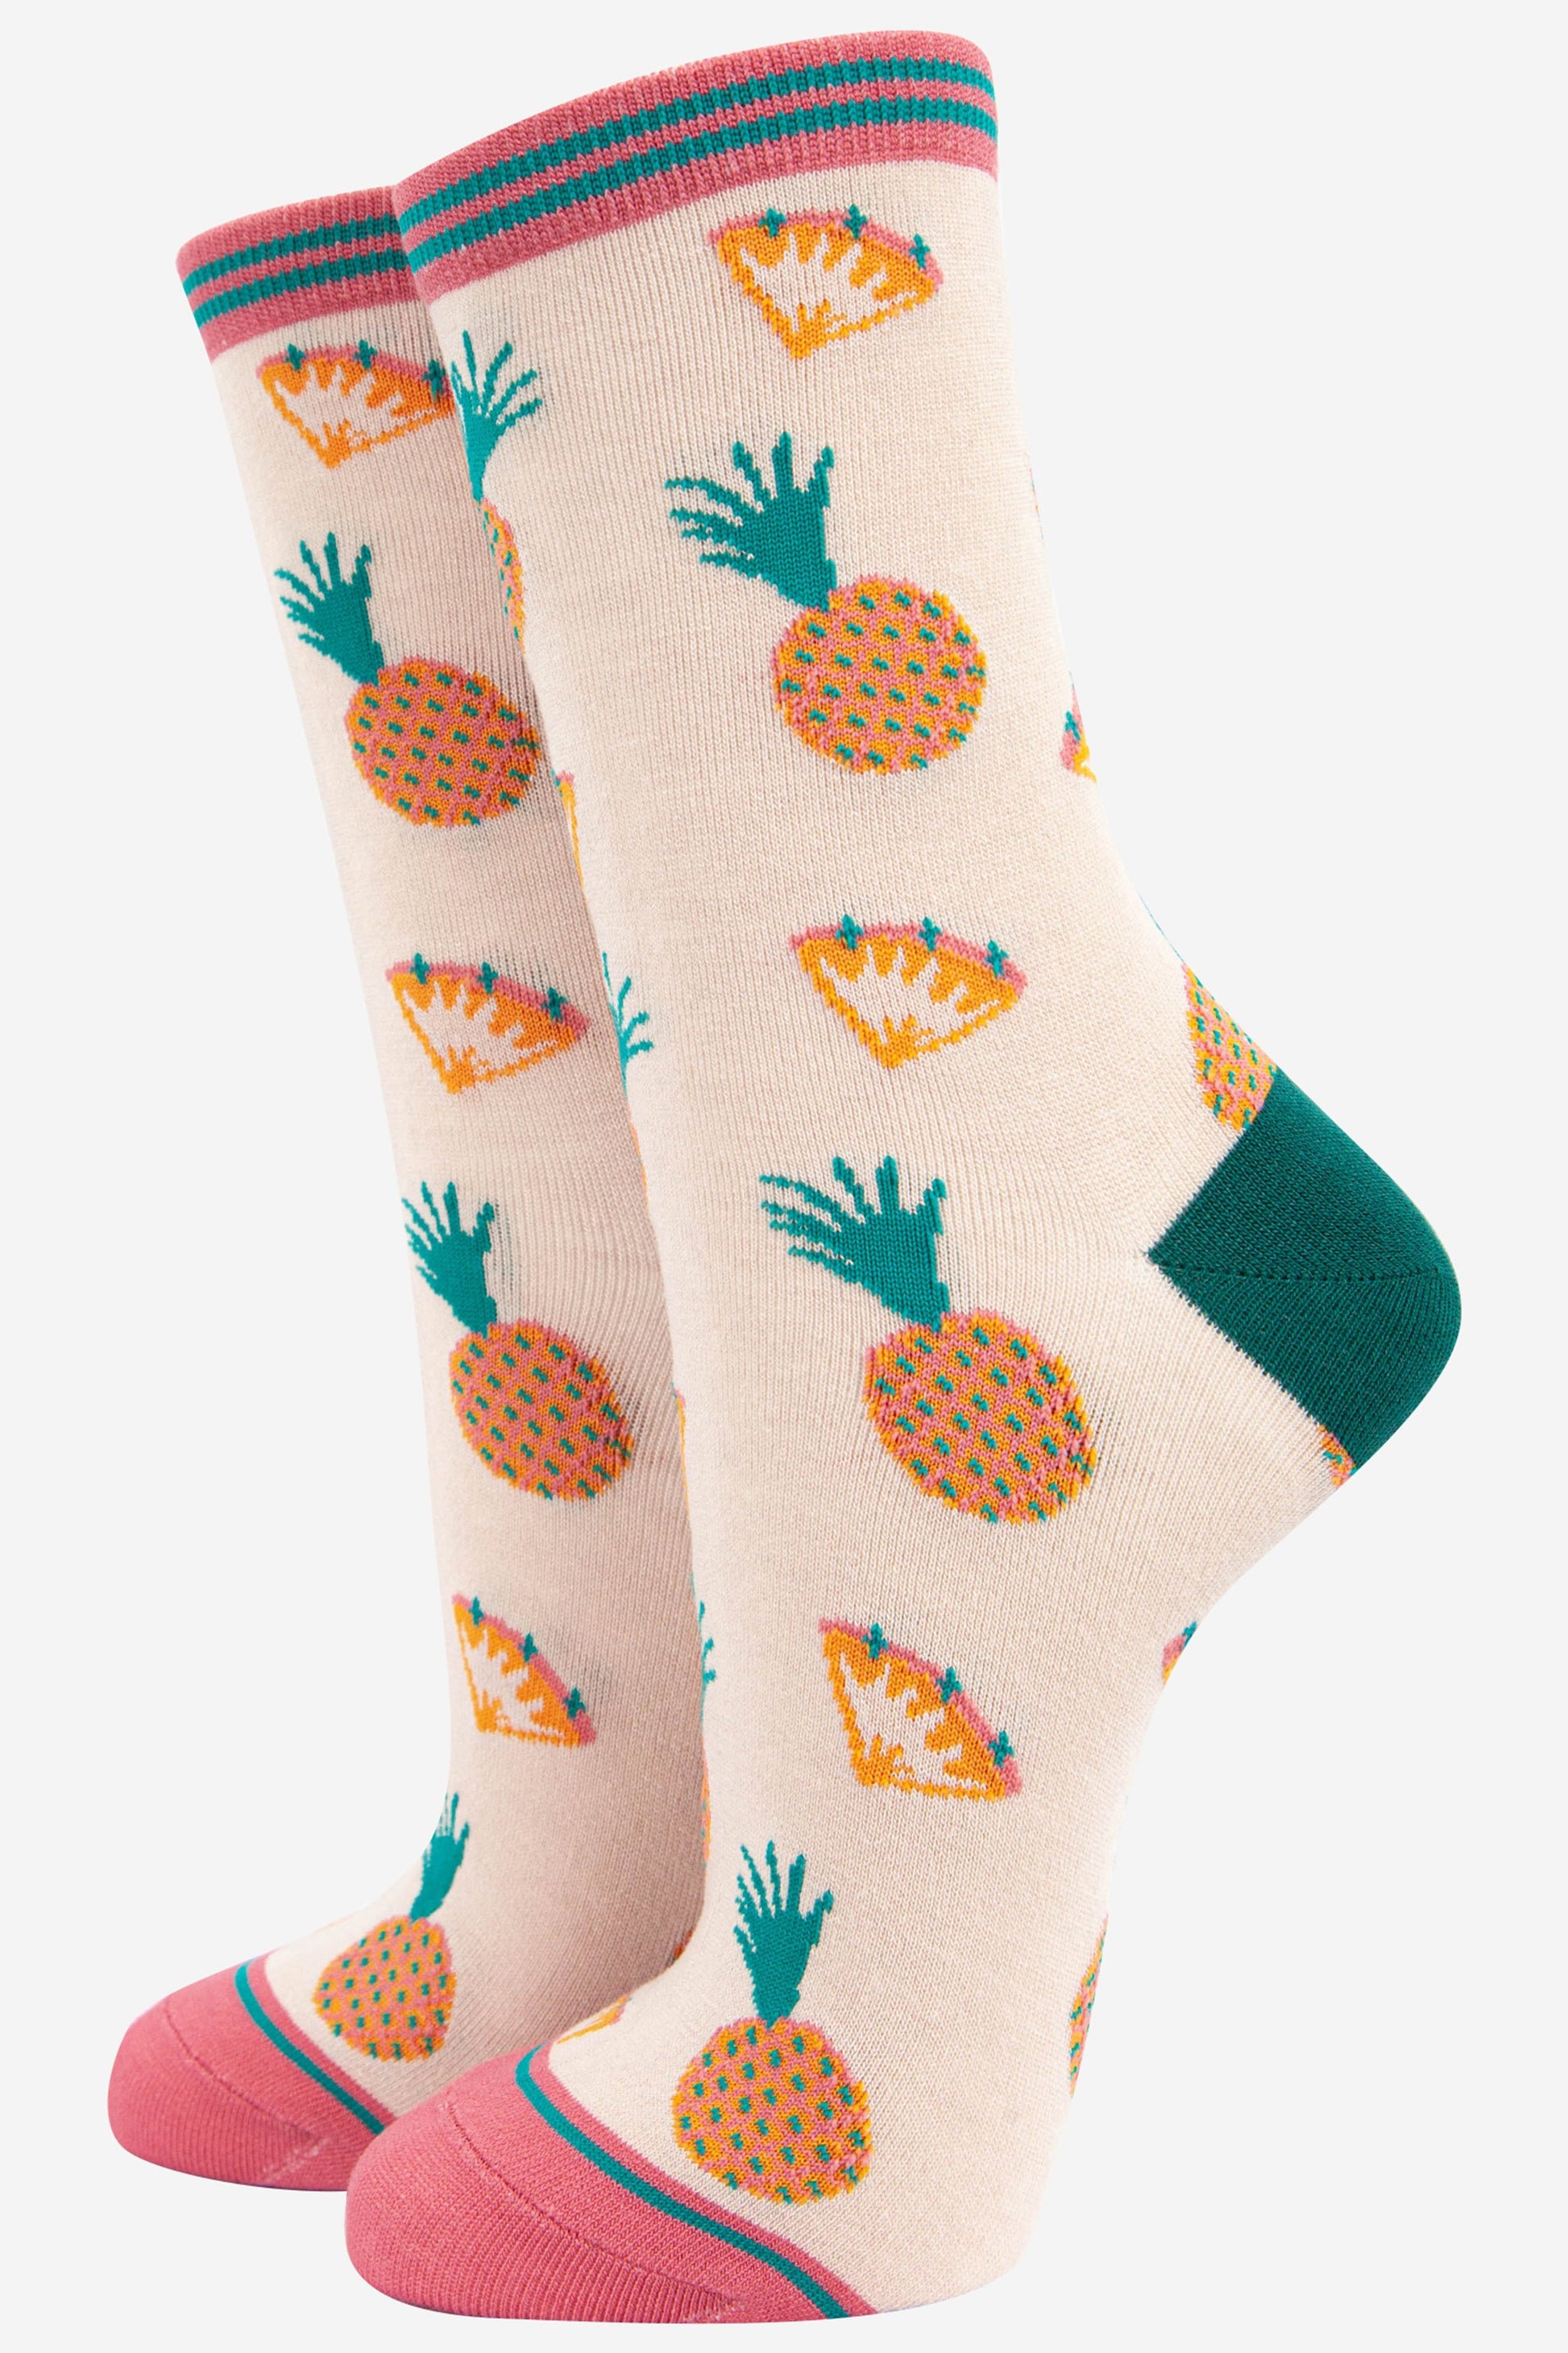 cream and pink bamboo socks with an all over pineapple fruit print pattern and striped cuff